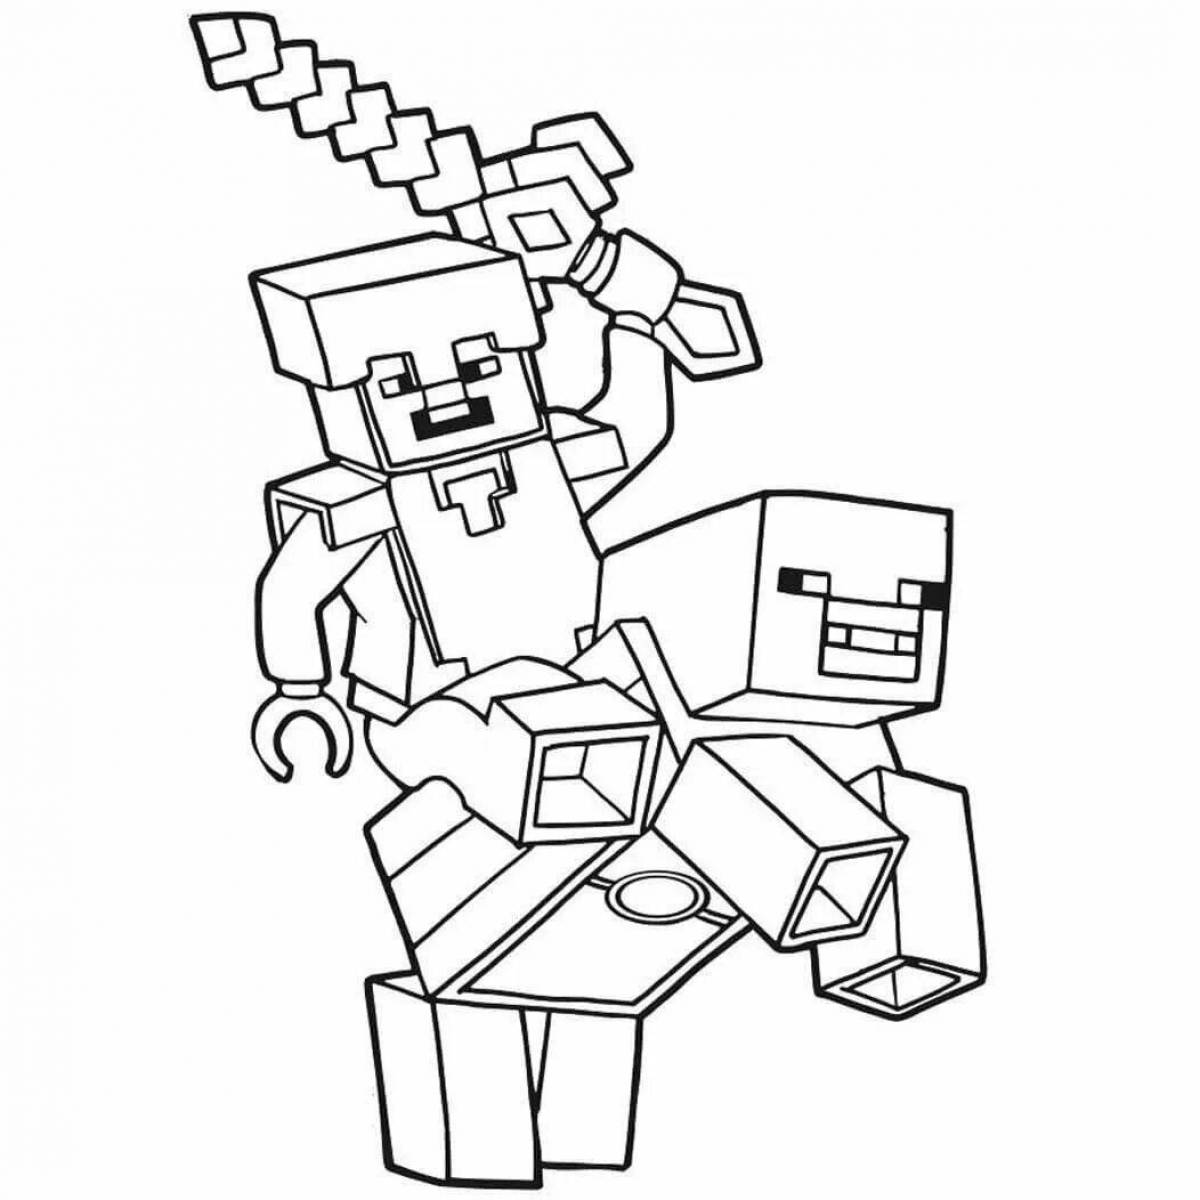 Fascinating minecraft portal coloring page